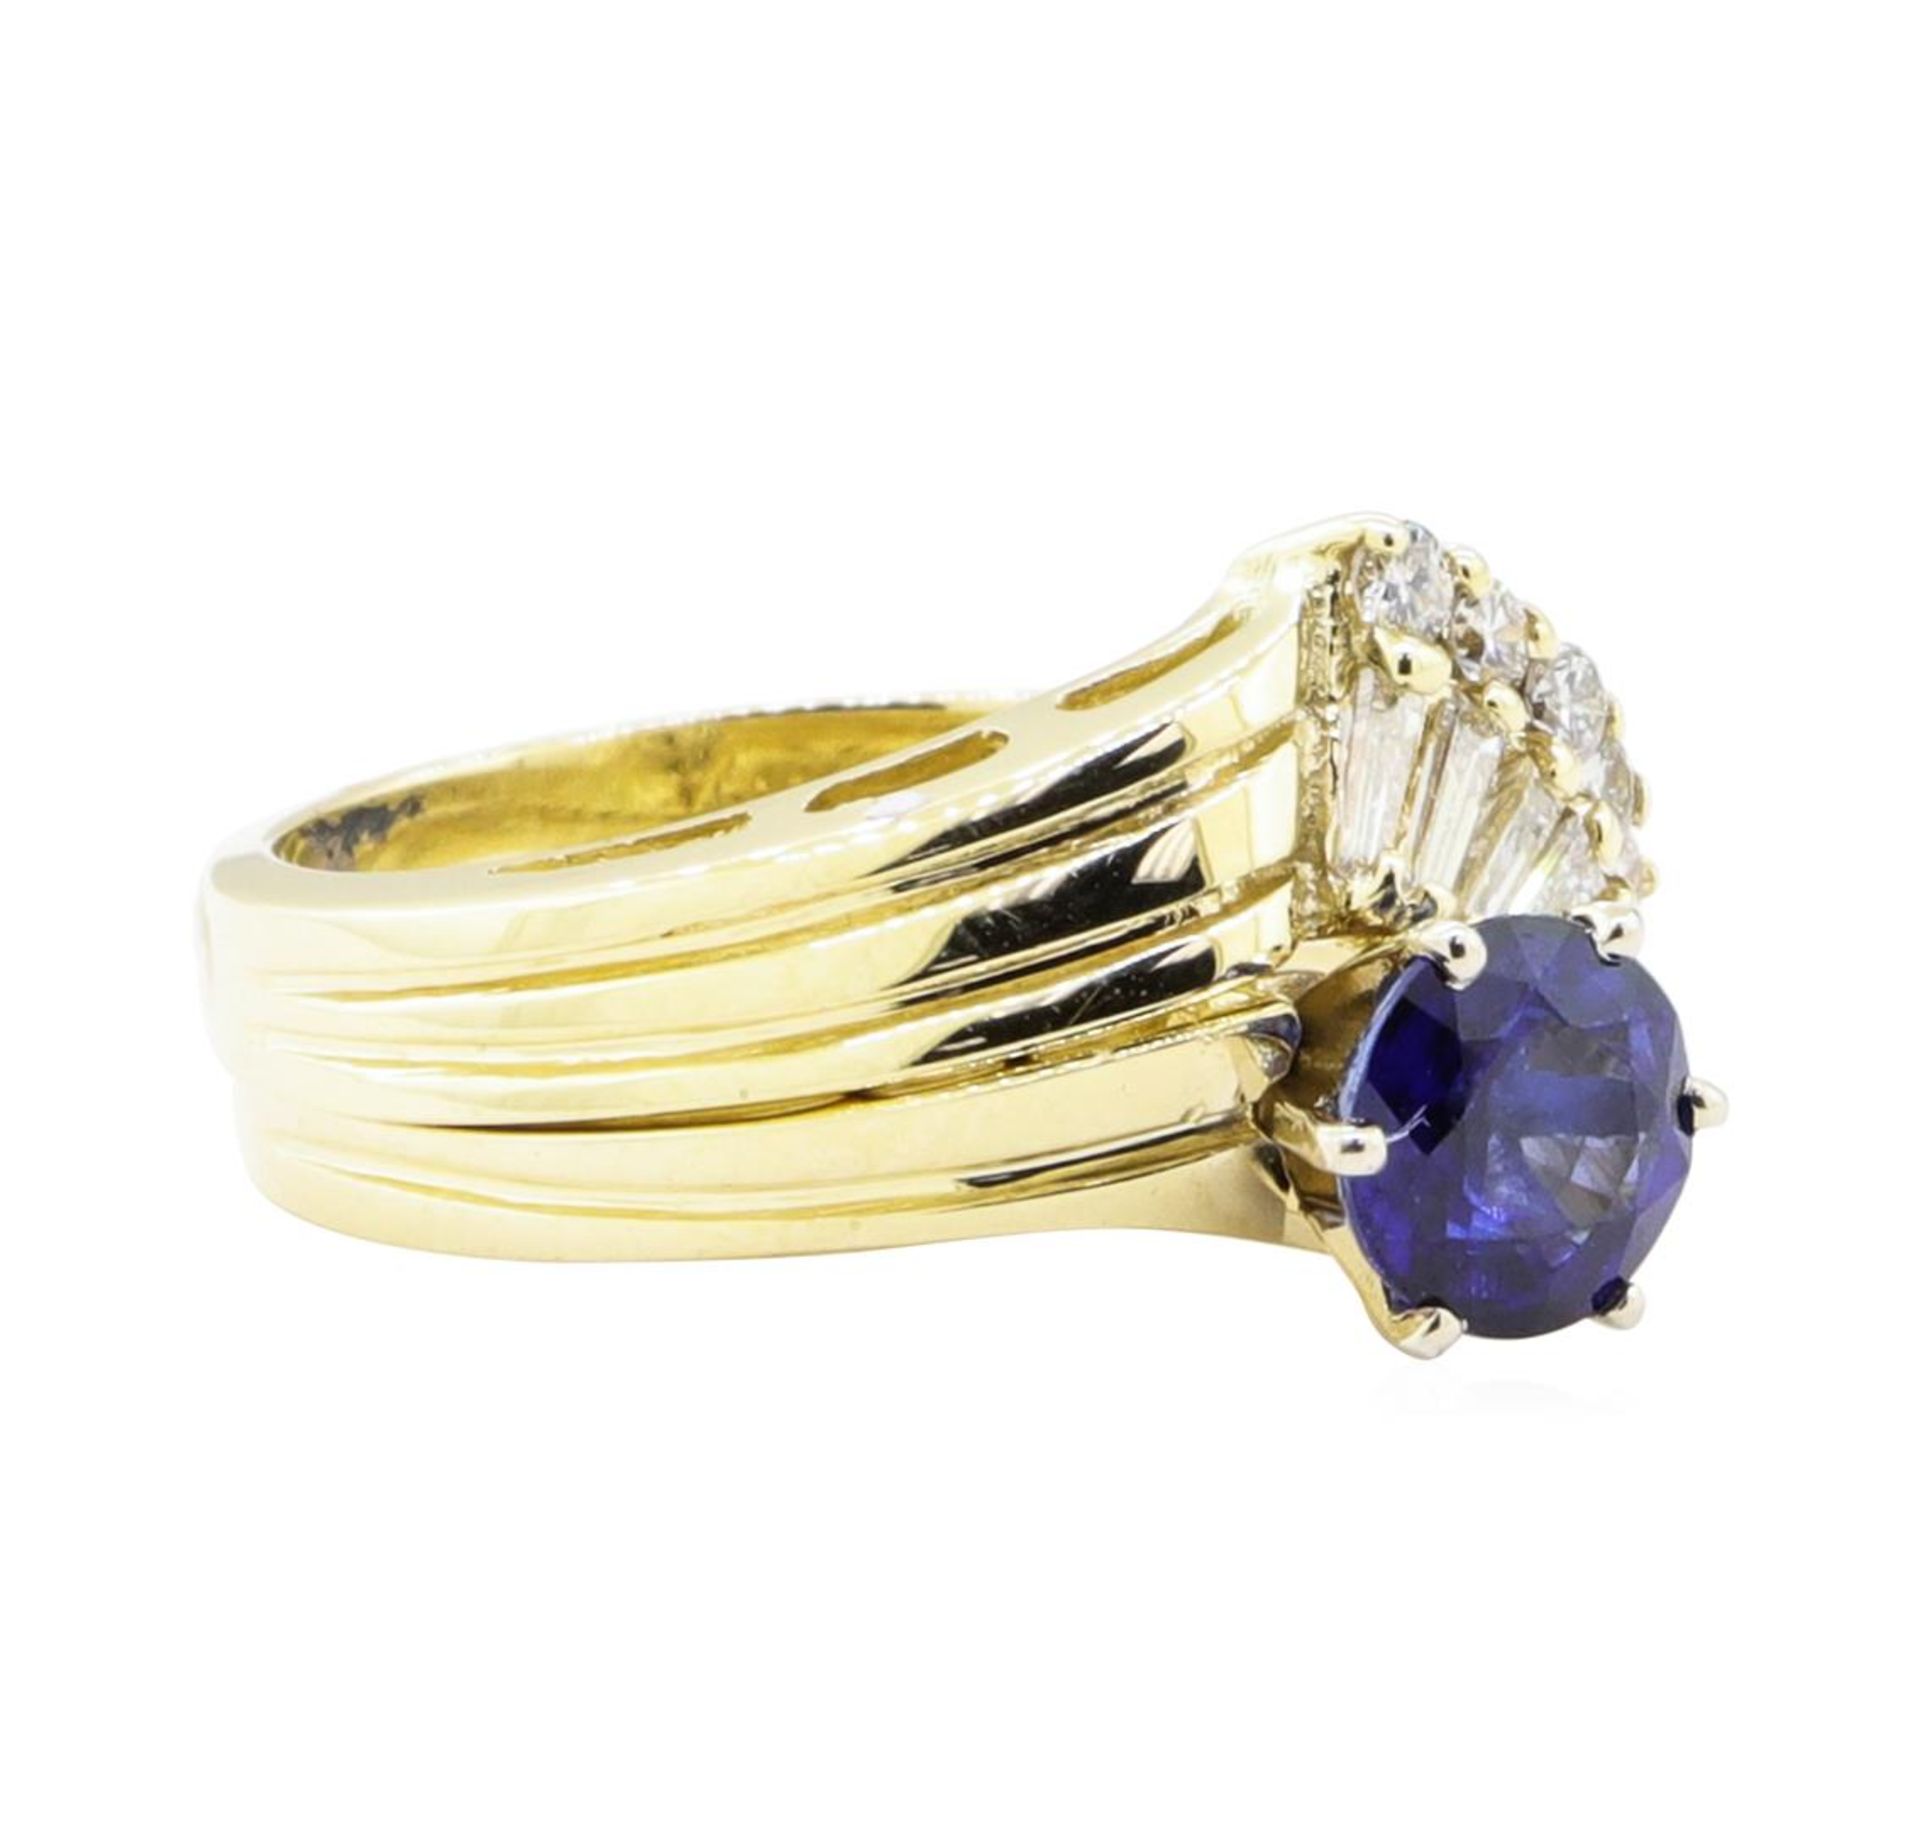 1.54ctw Sapphire and Diamond Ring - 14KT Yellow Gold